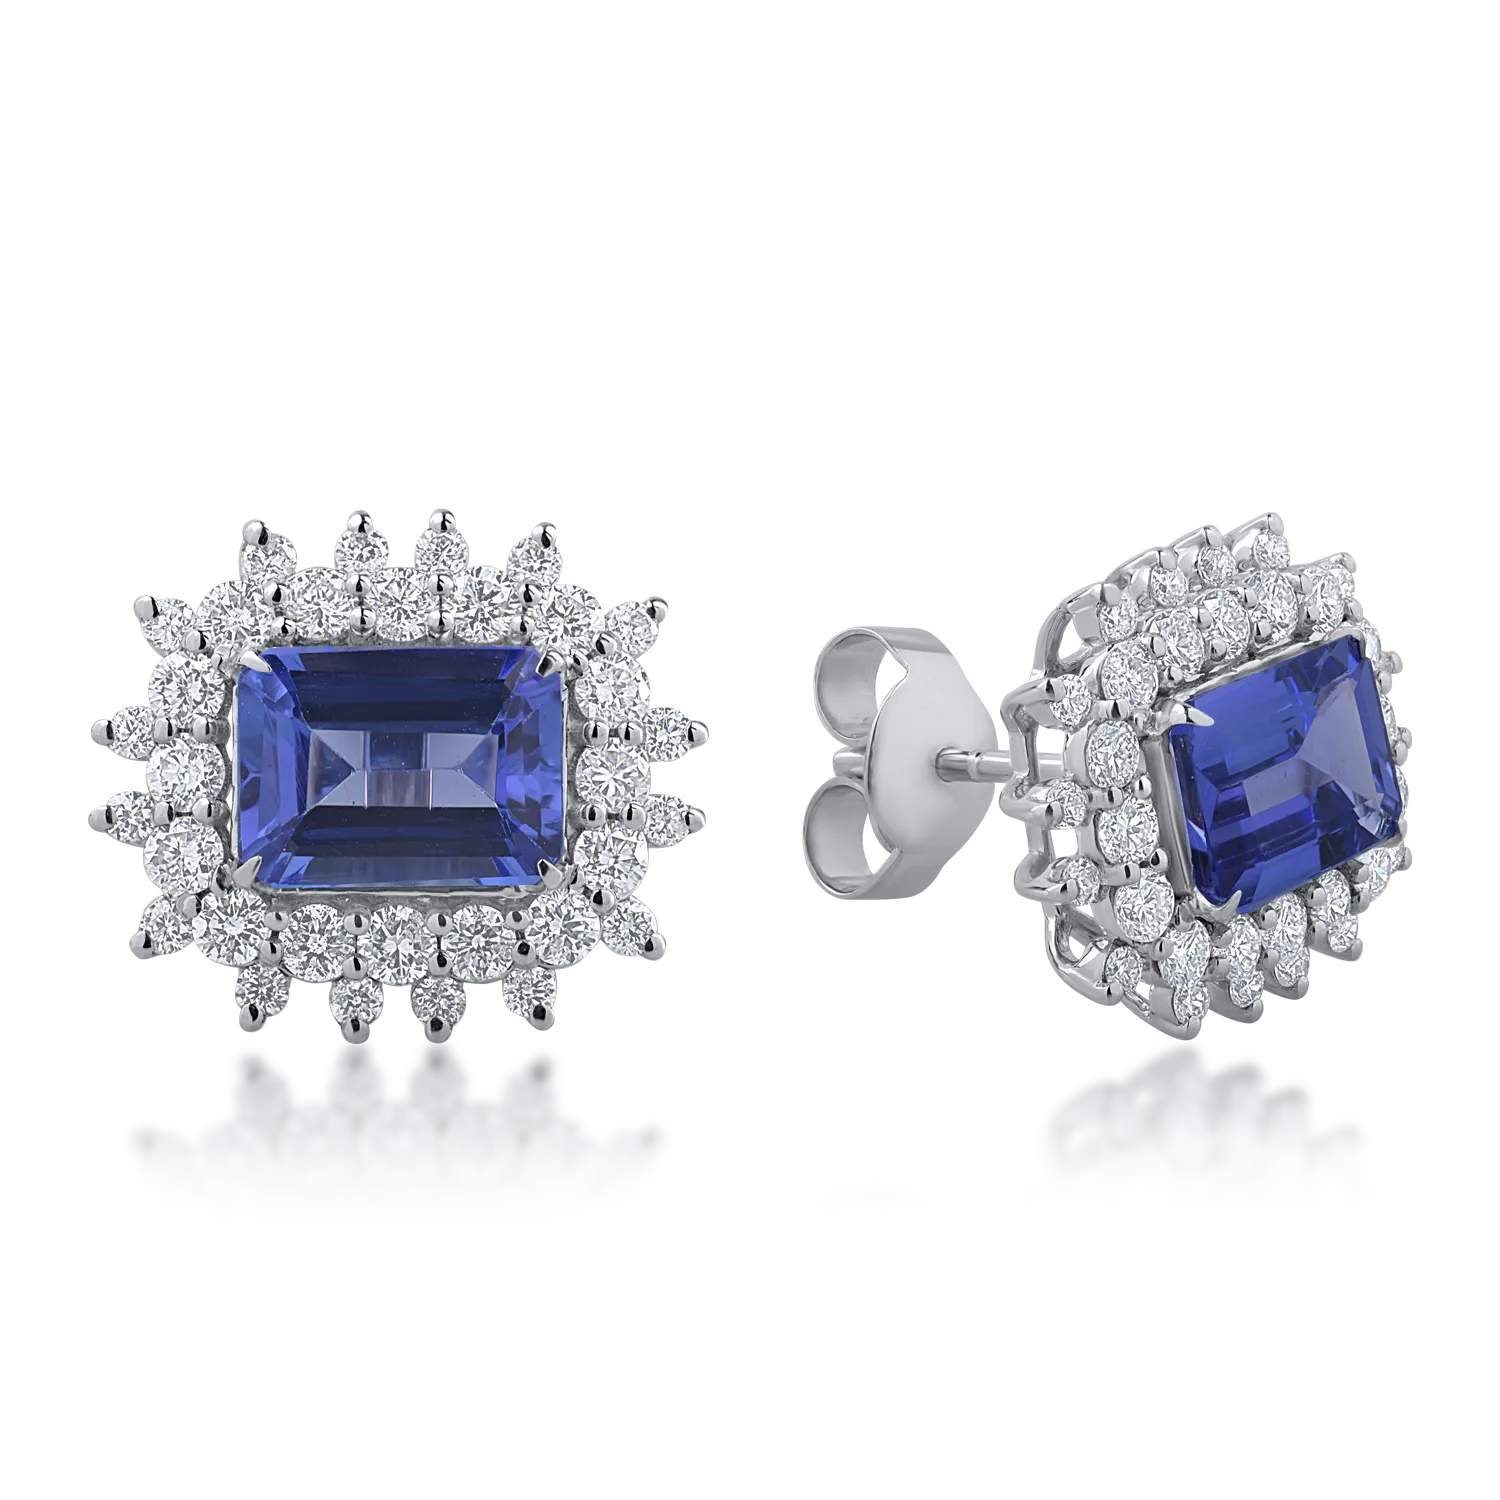 White gold earrings with 3.31ct tanzanites and 1.26ct diamonds